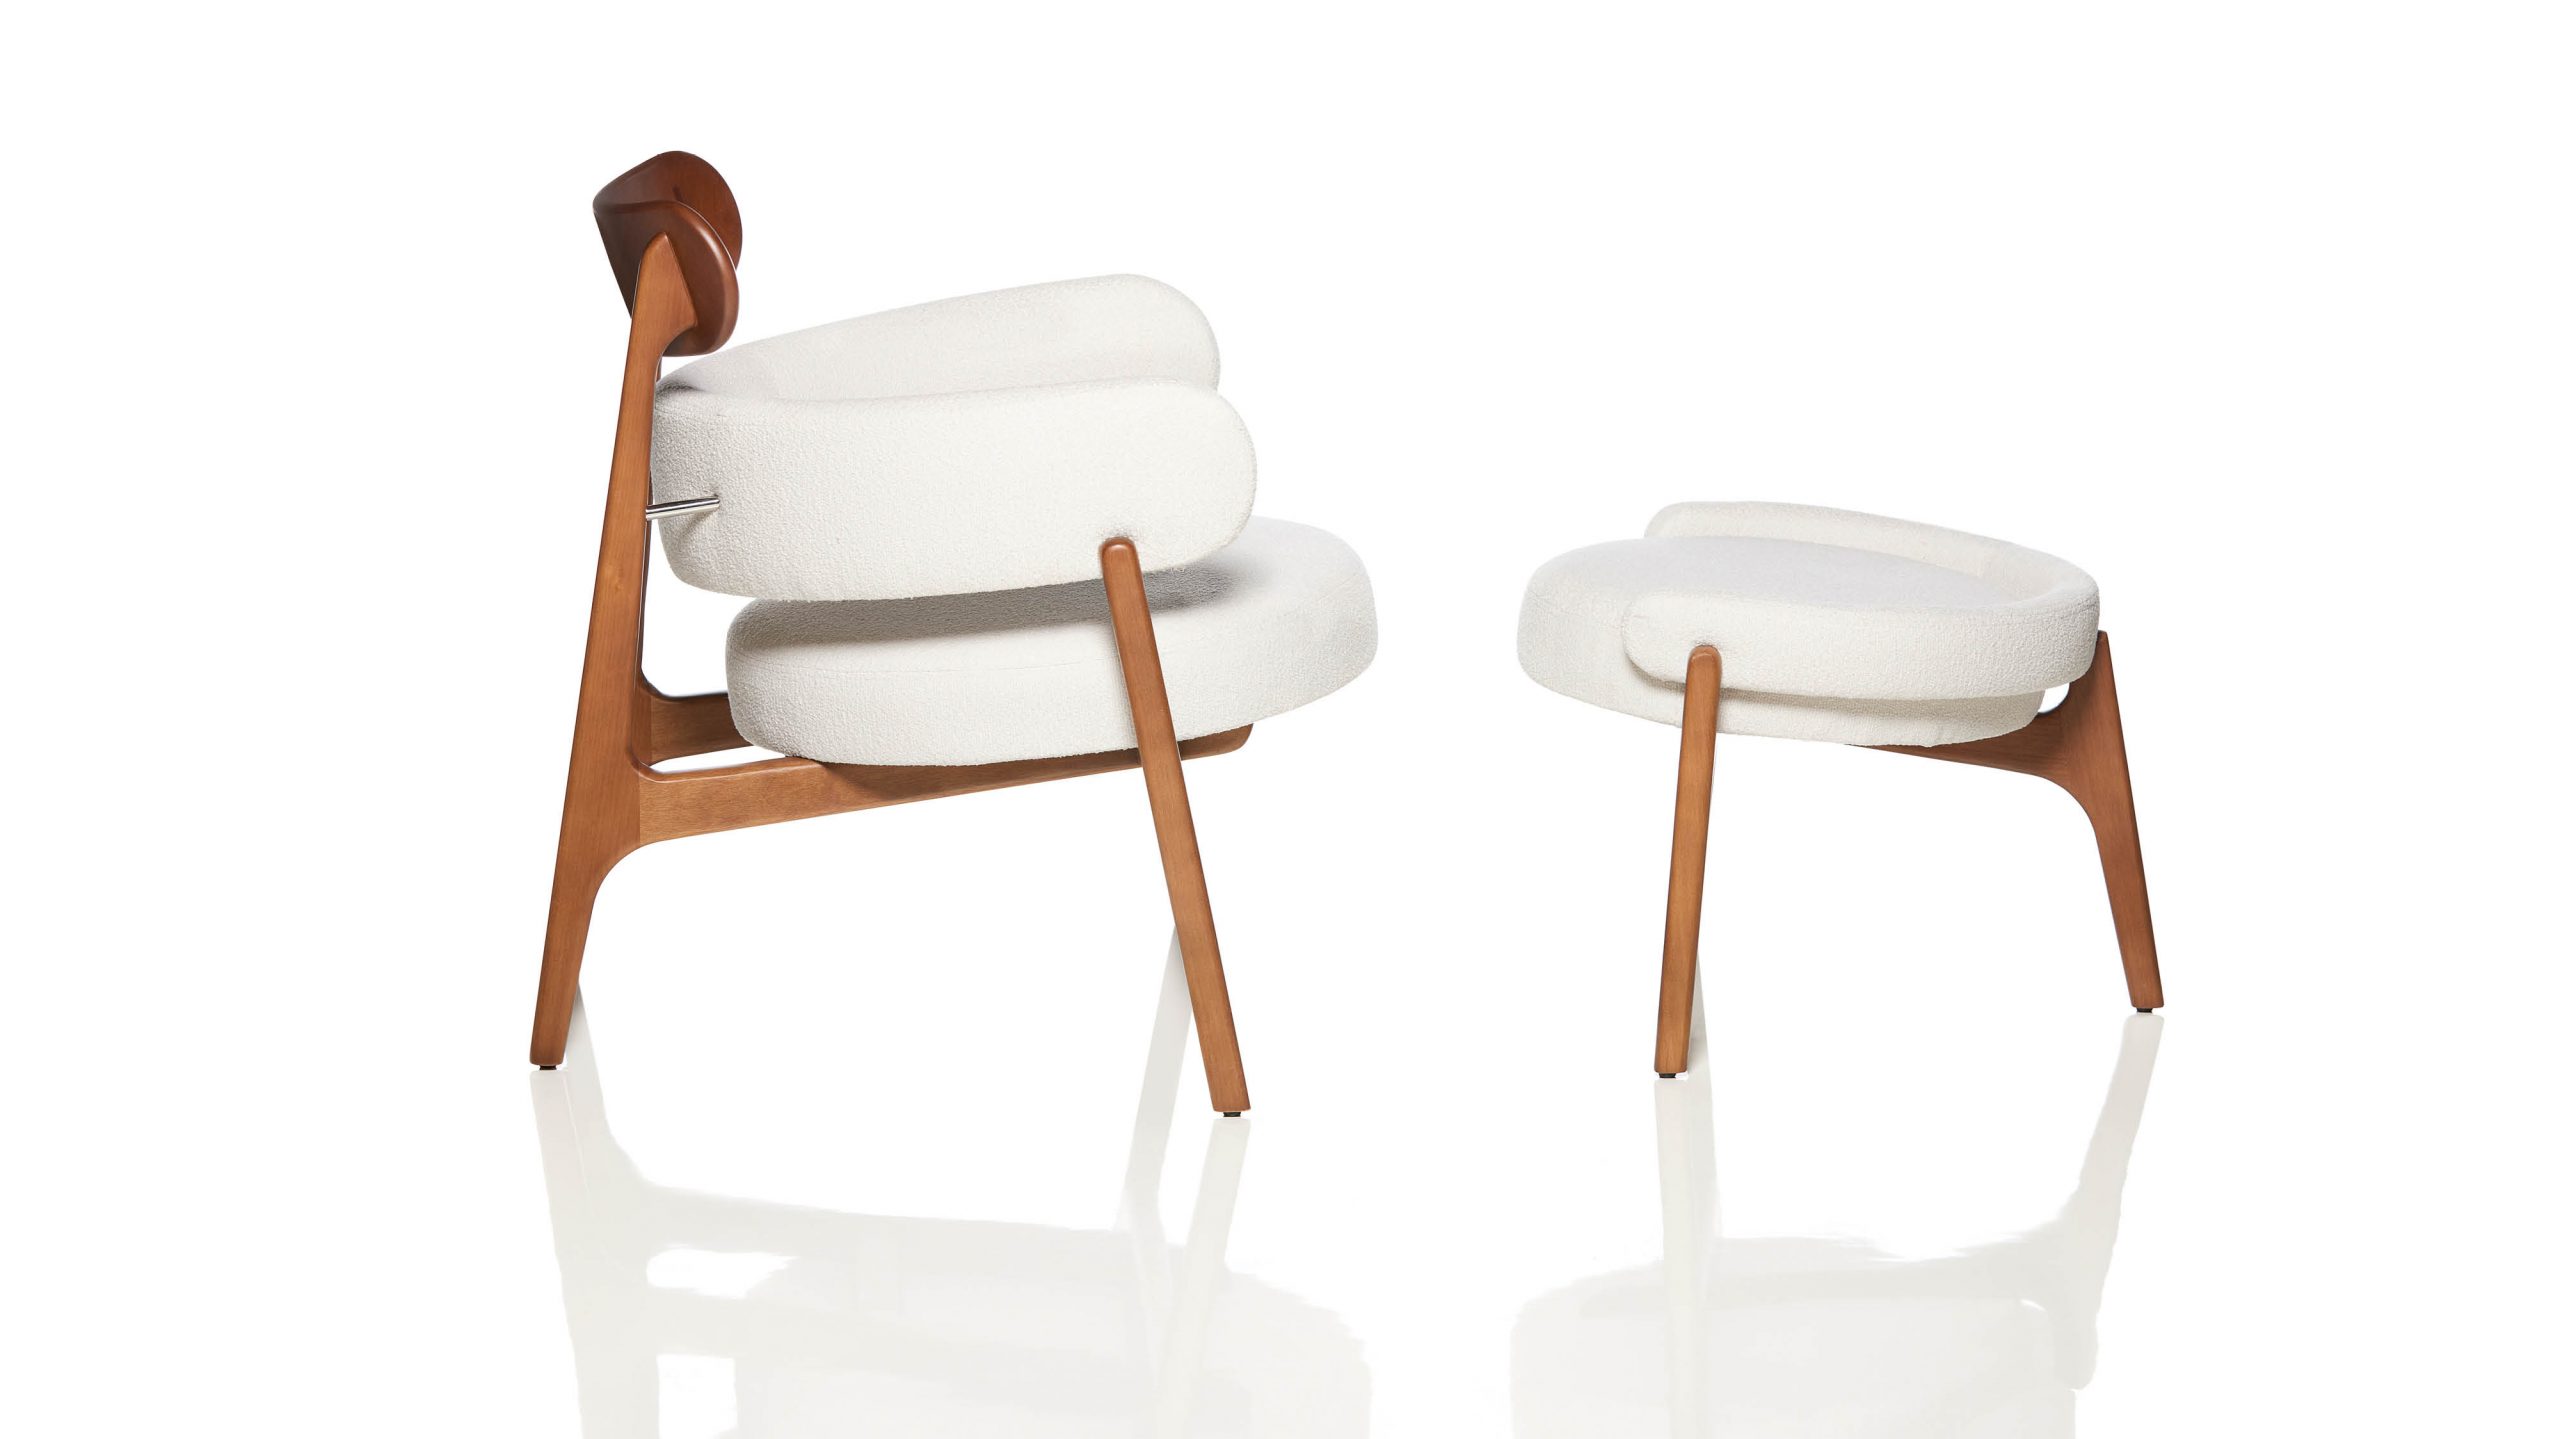 Lapa Armchair and Puff Castanho . By Alexandre Kasper